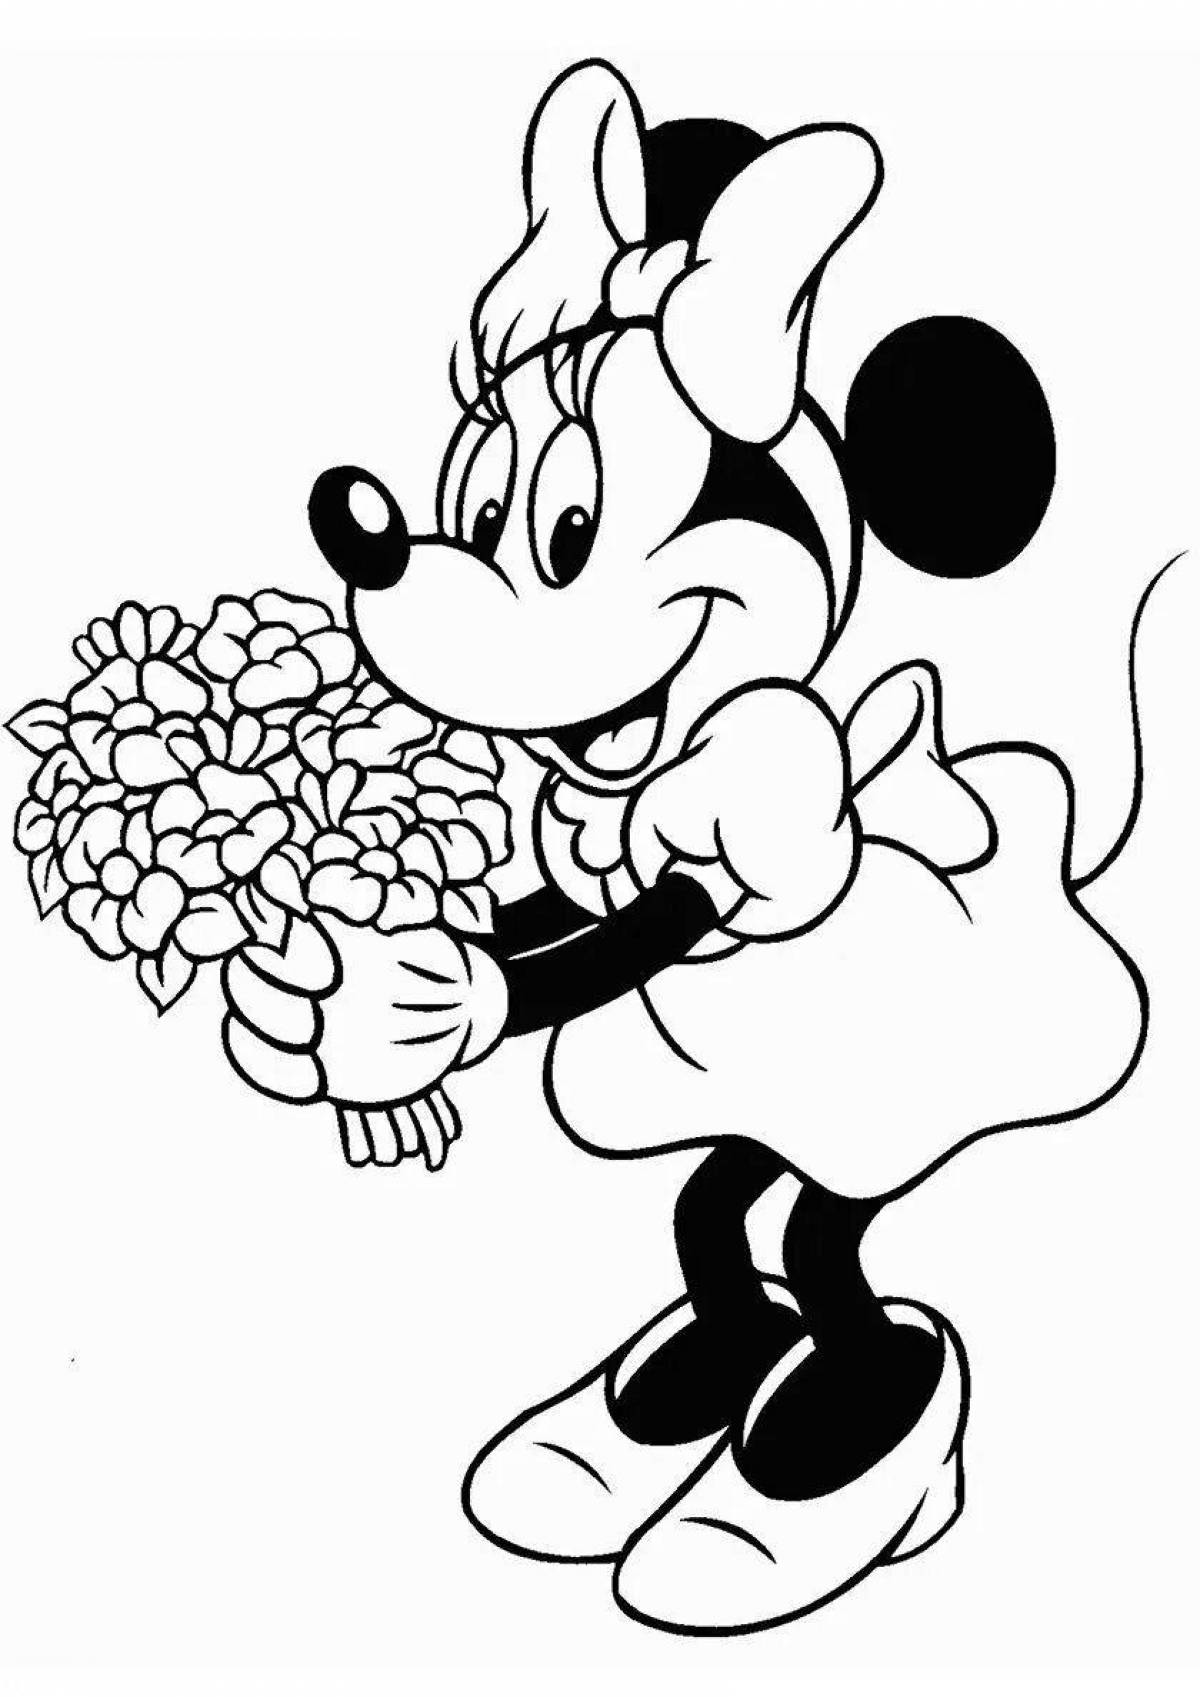 Exciting minnie mouse coloring book